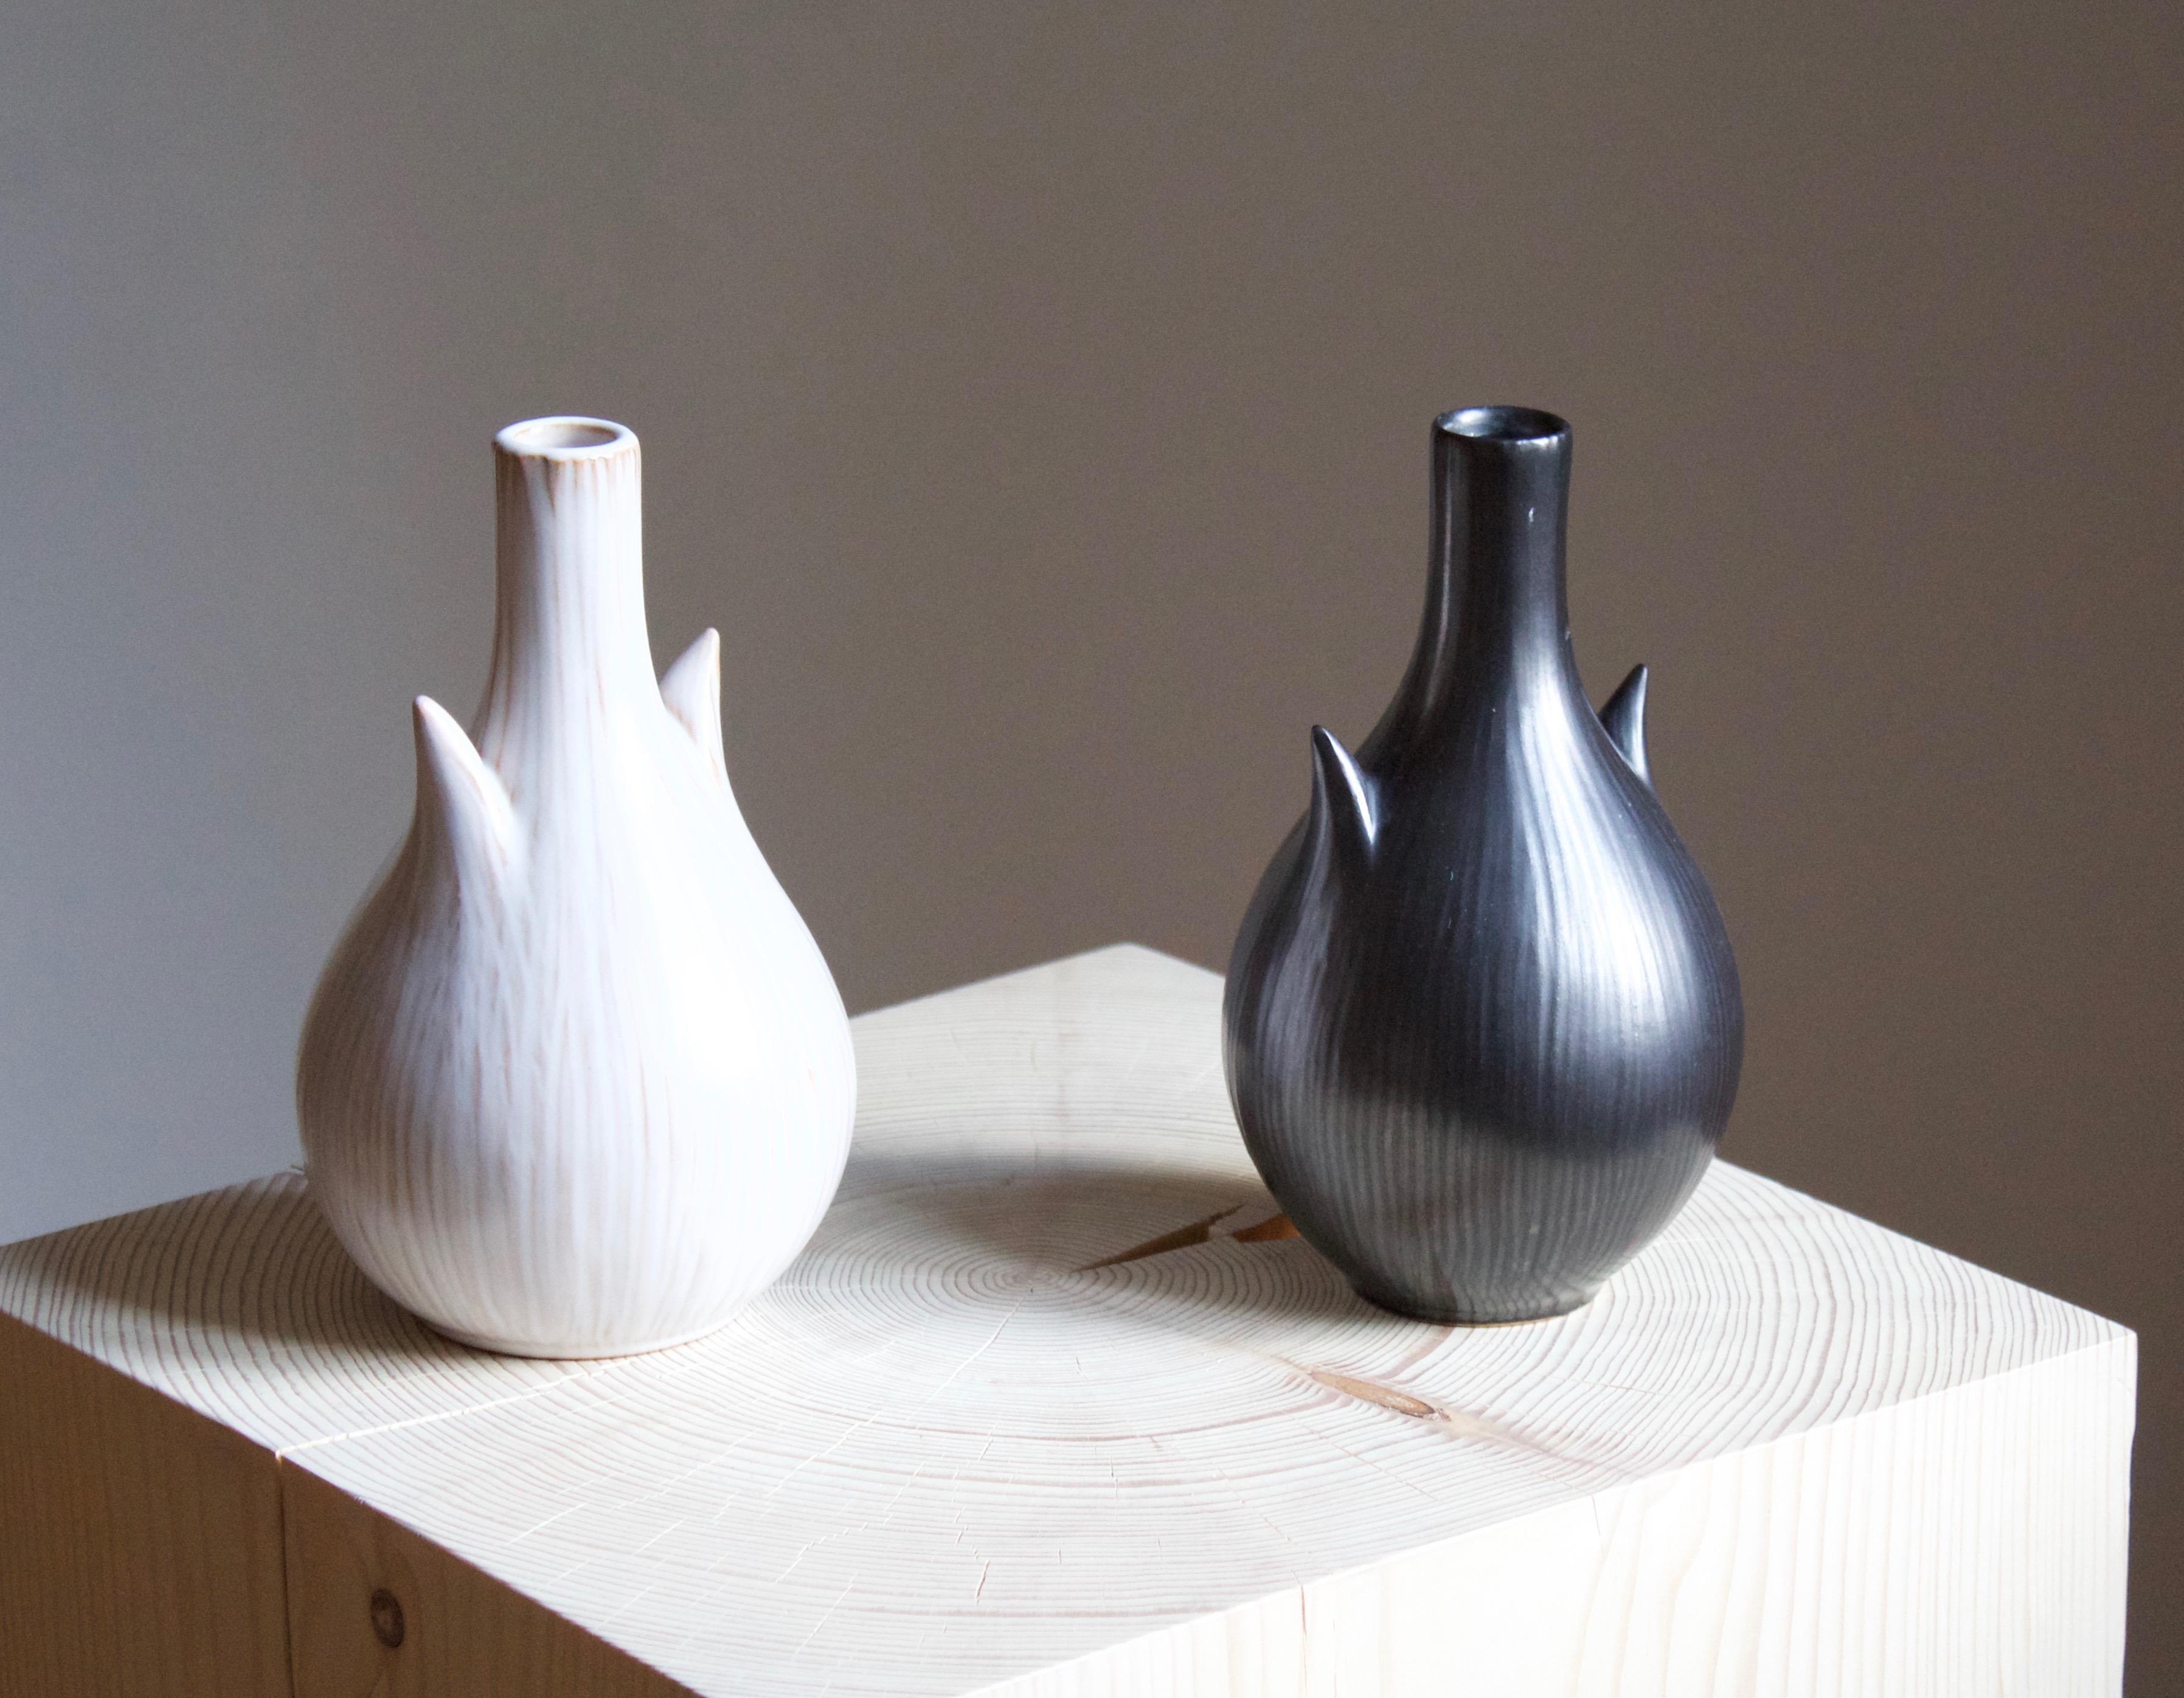 A pair of vases. Produced by Ejvind Nielsen in his studio in Hvidovre, Denmark. Produced circa 1950s-1960s. Signed.